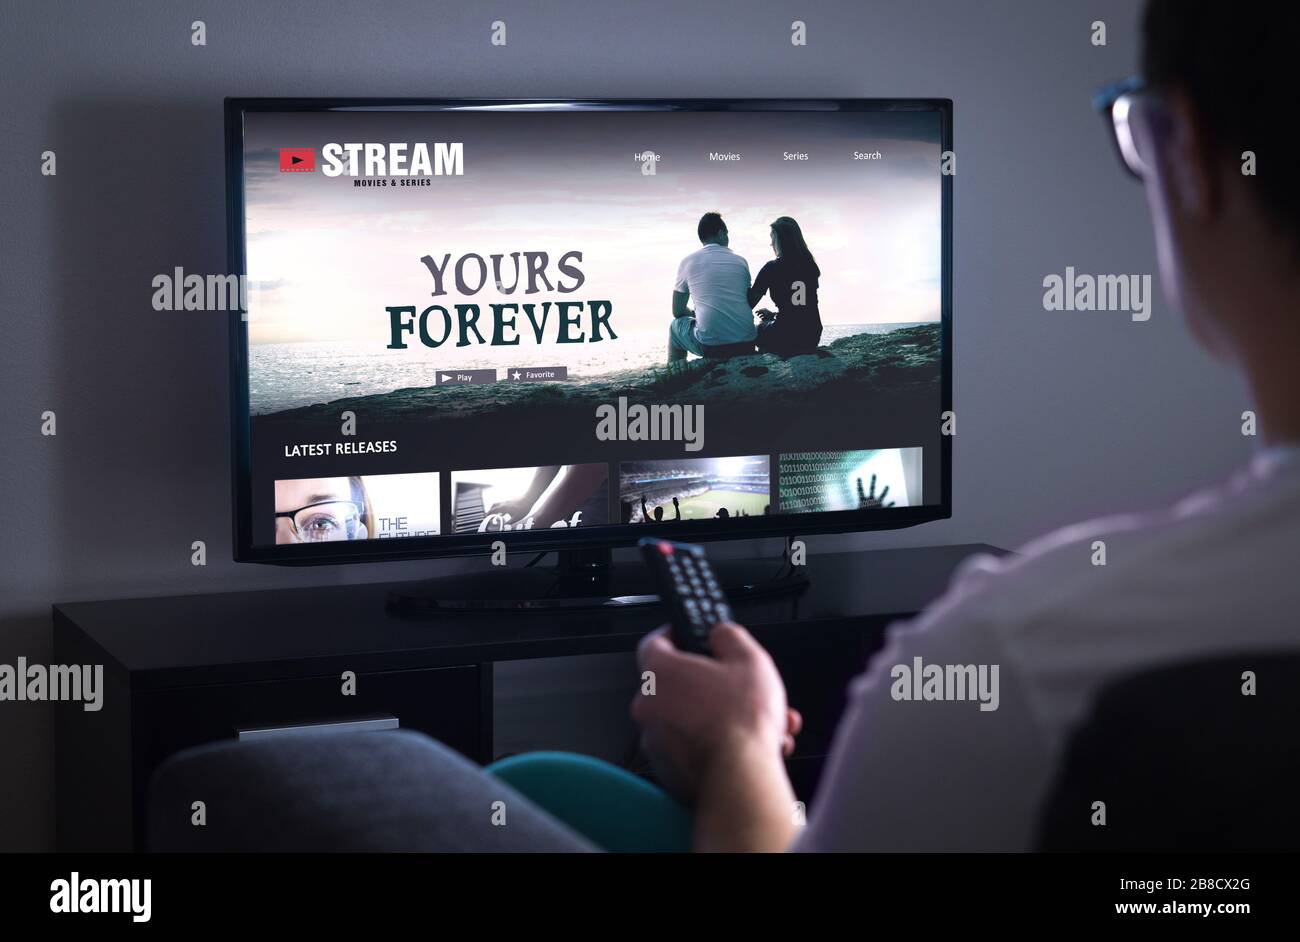 Online Movie Stream Service In Smart Tv Streaming Series With On Demand Video Vod Service In Television Man Choosing Film To Watch With Remote Stock Photo Alamy